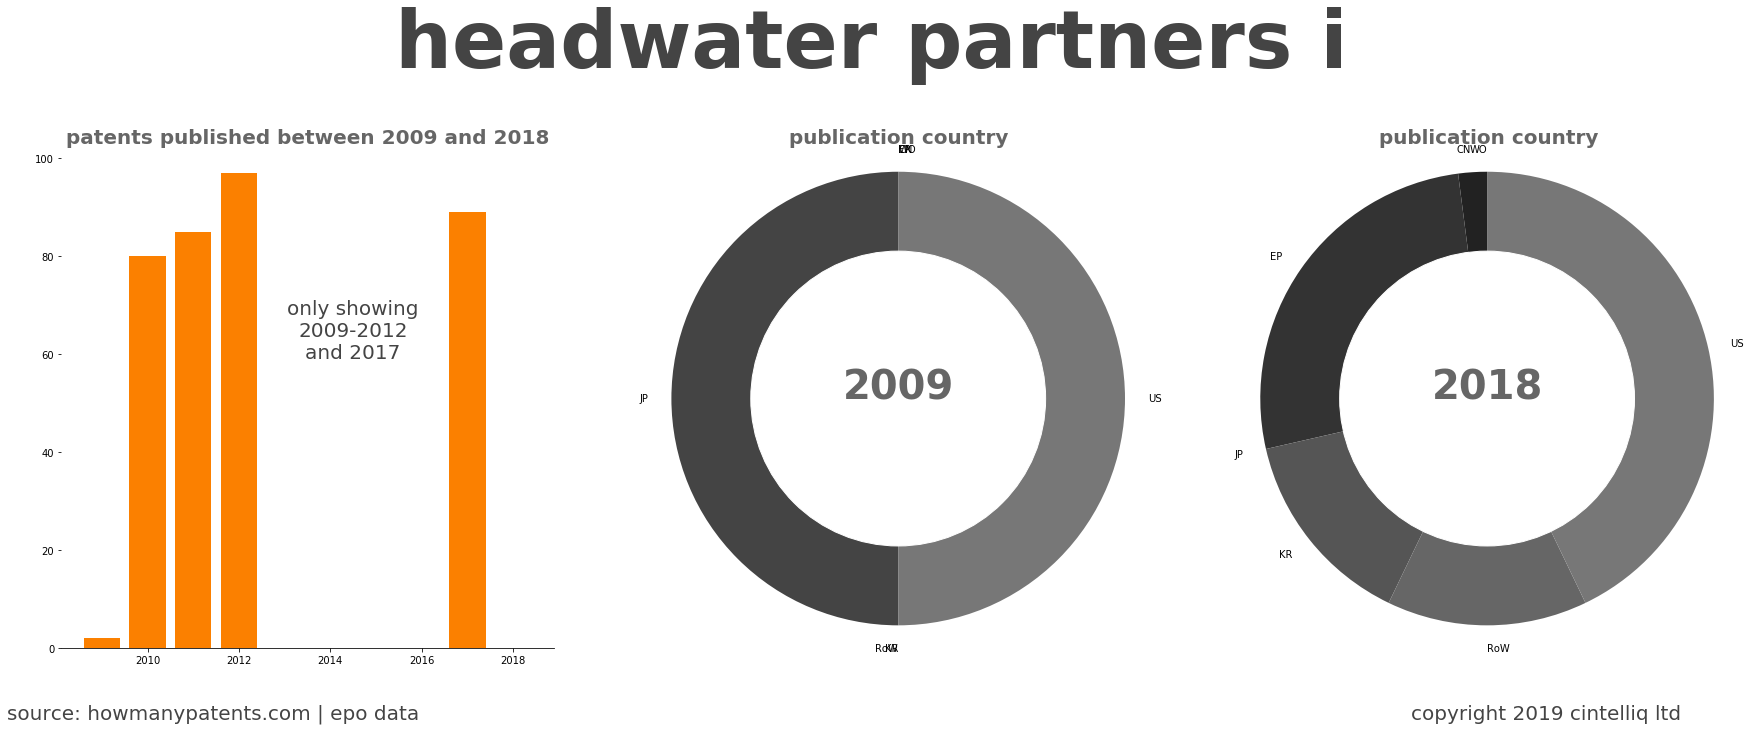 summary of patents for Headwater Partners I